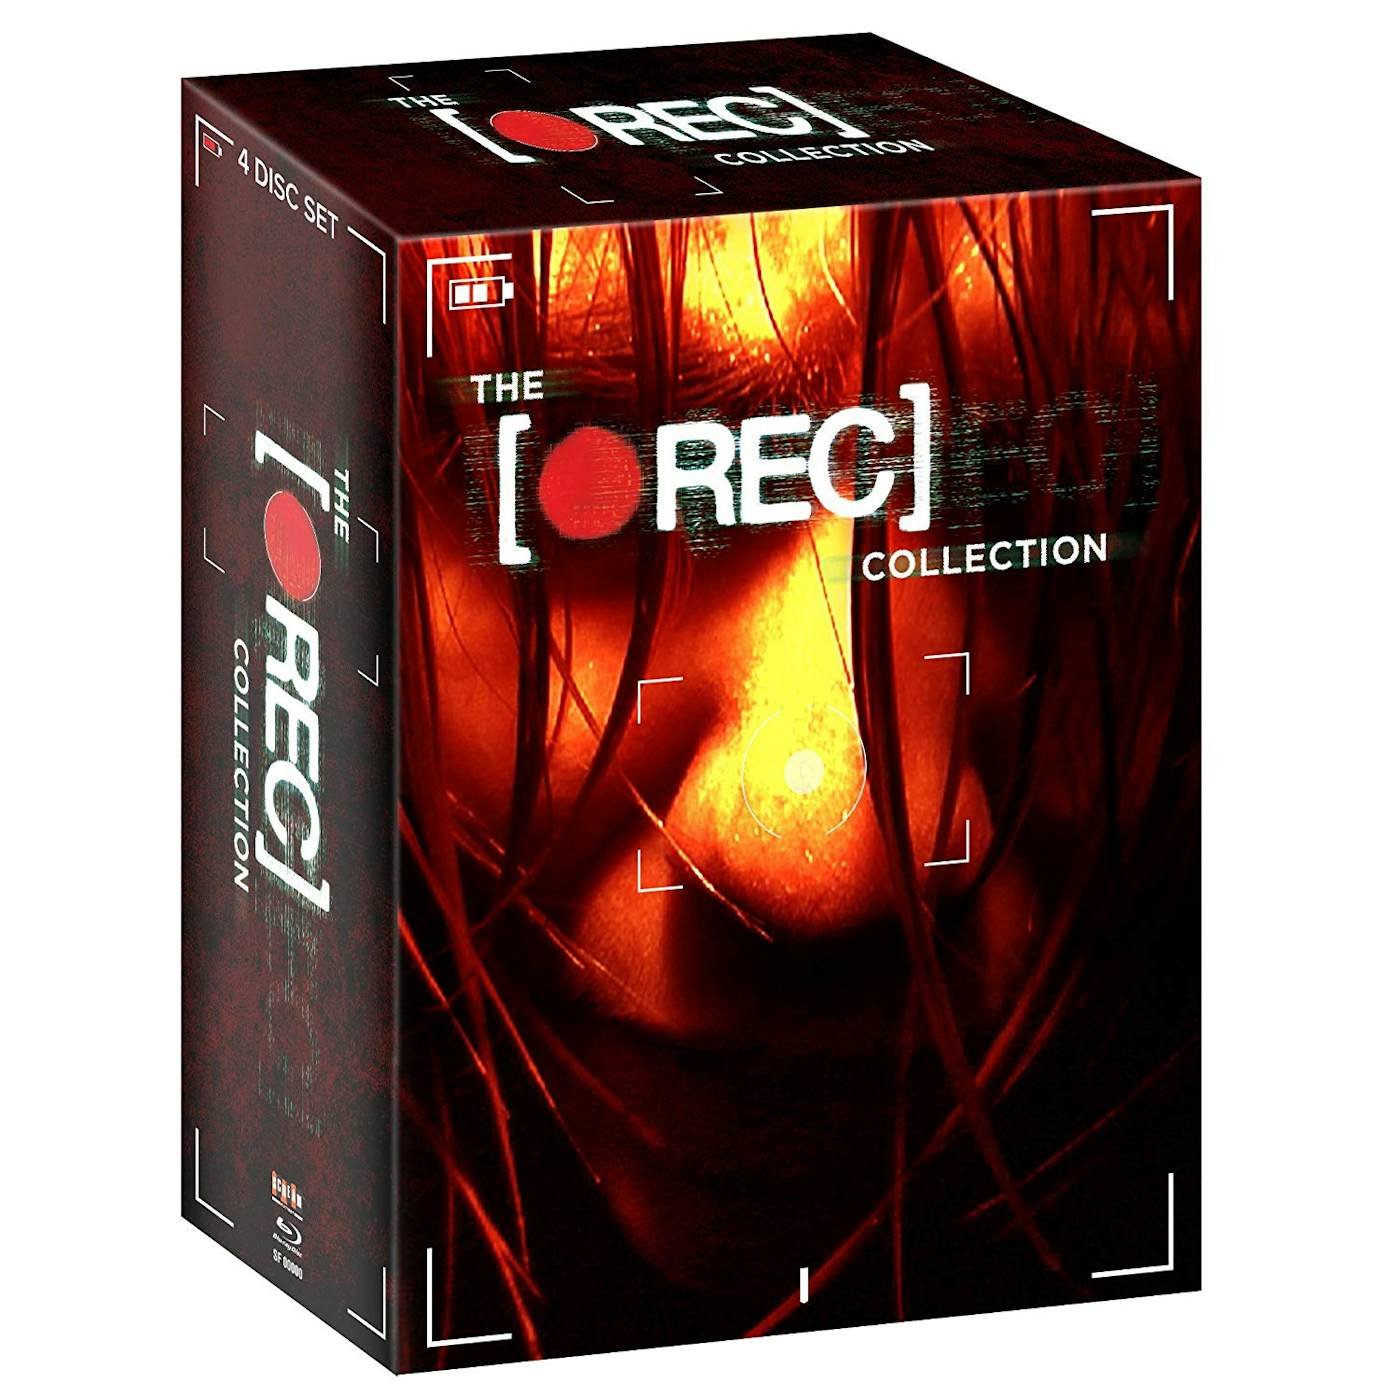 (REC) The Collection Blu-ray